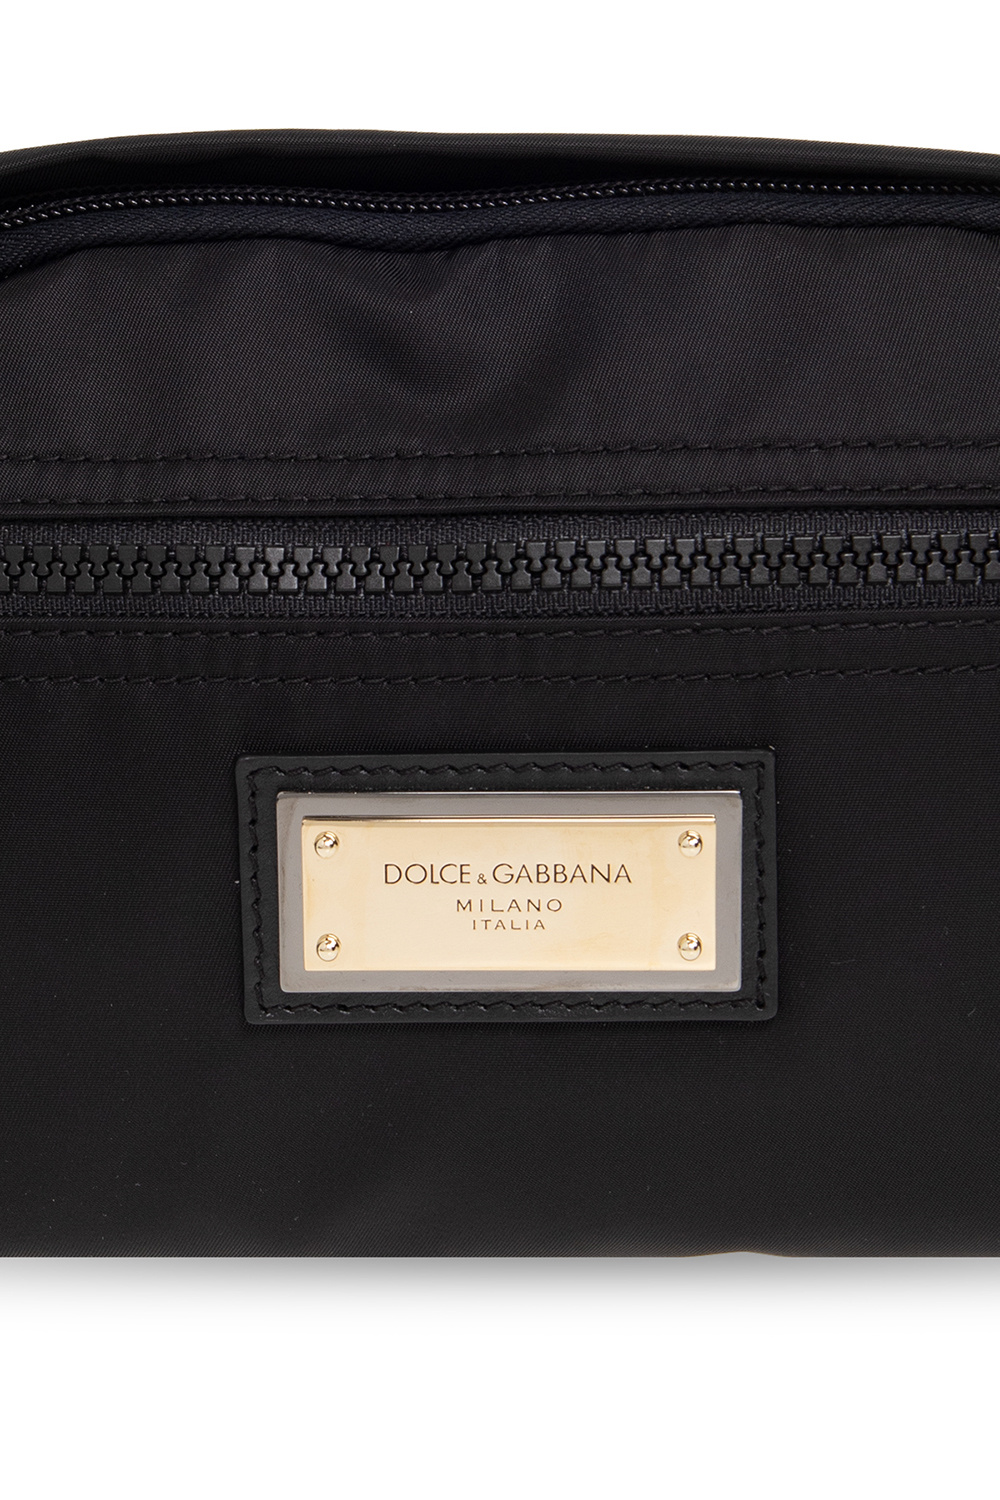 Dolce & Gabbana Here are your results for Dolce Gabbana Coats-Jackets